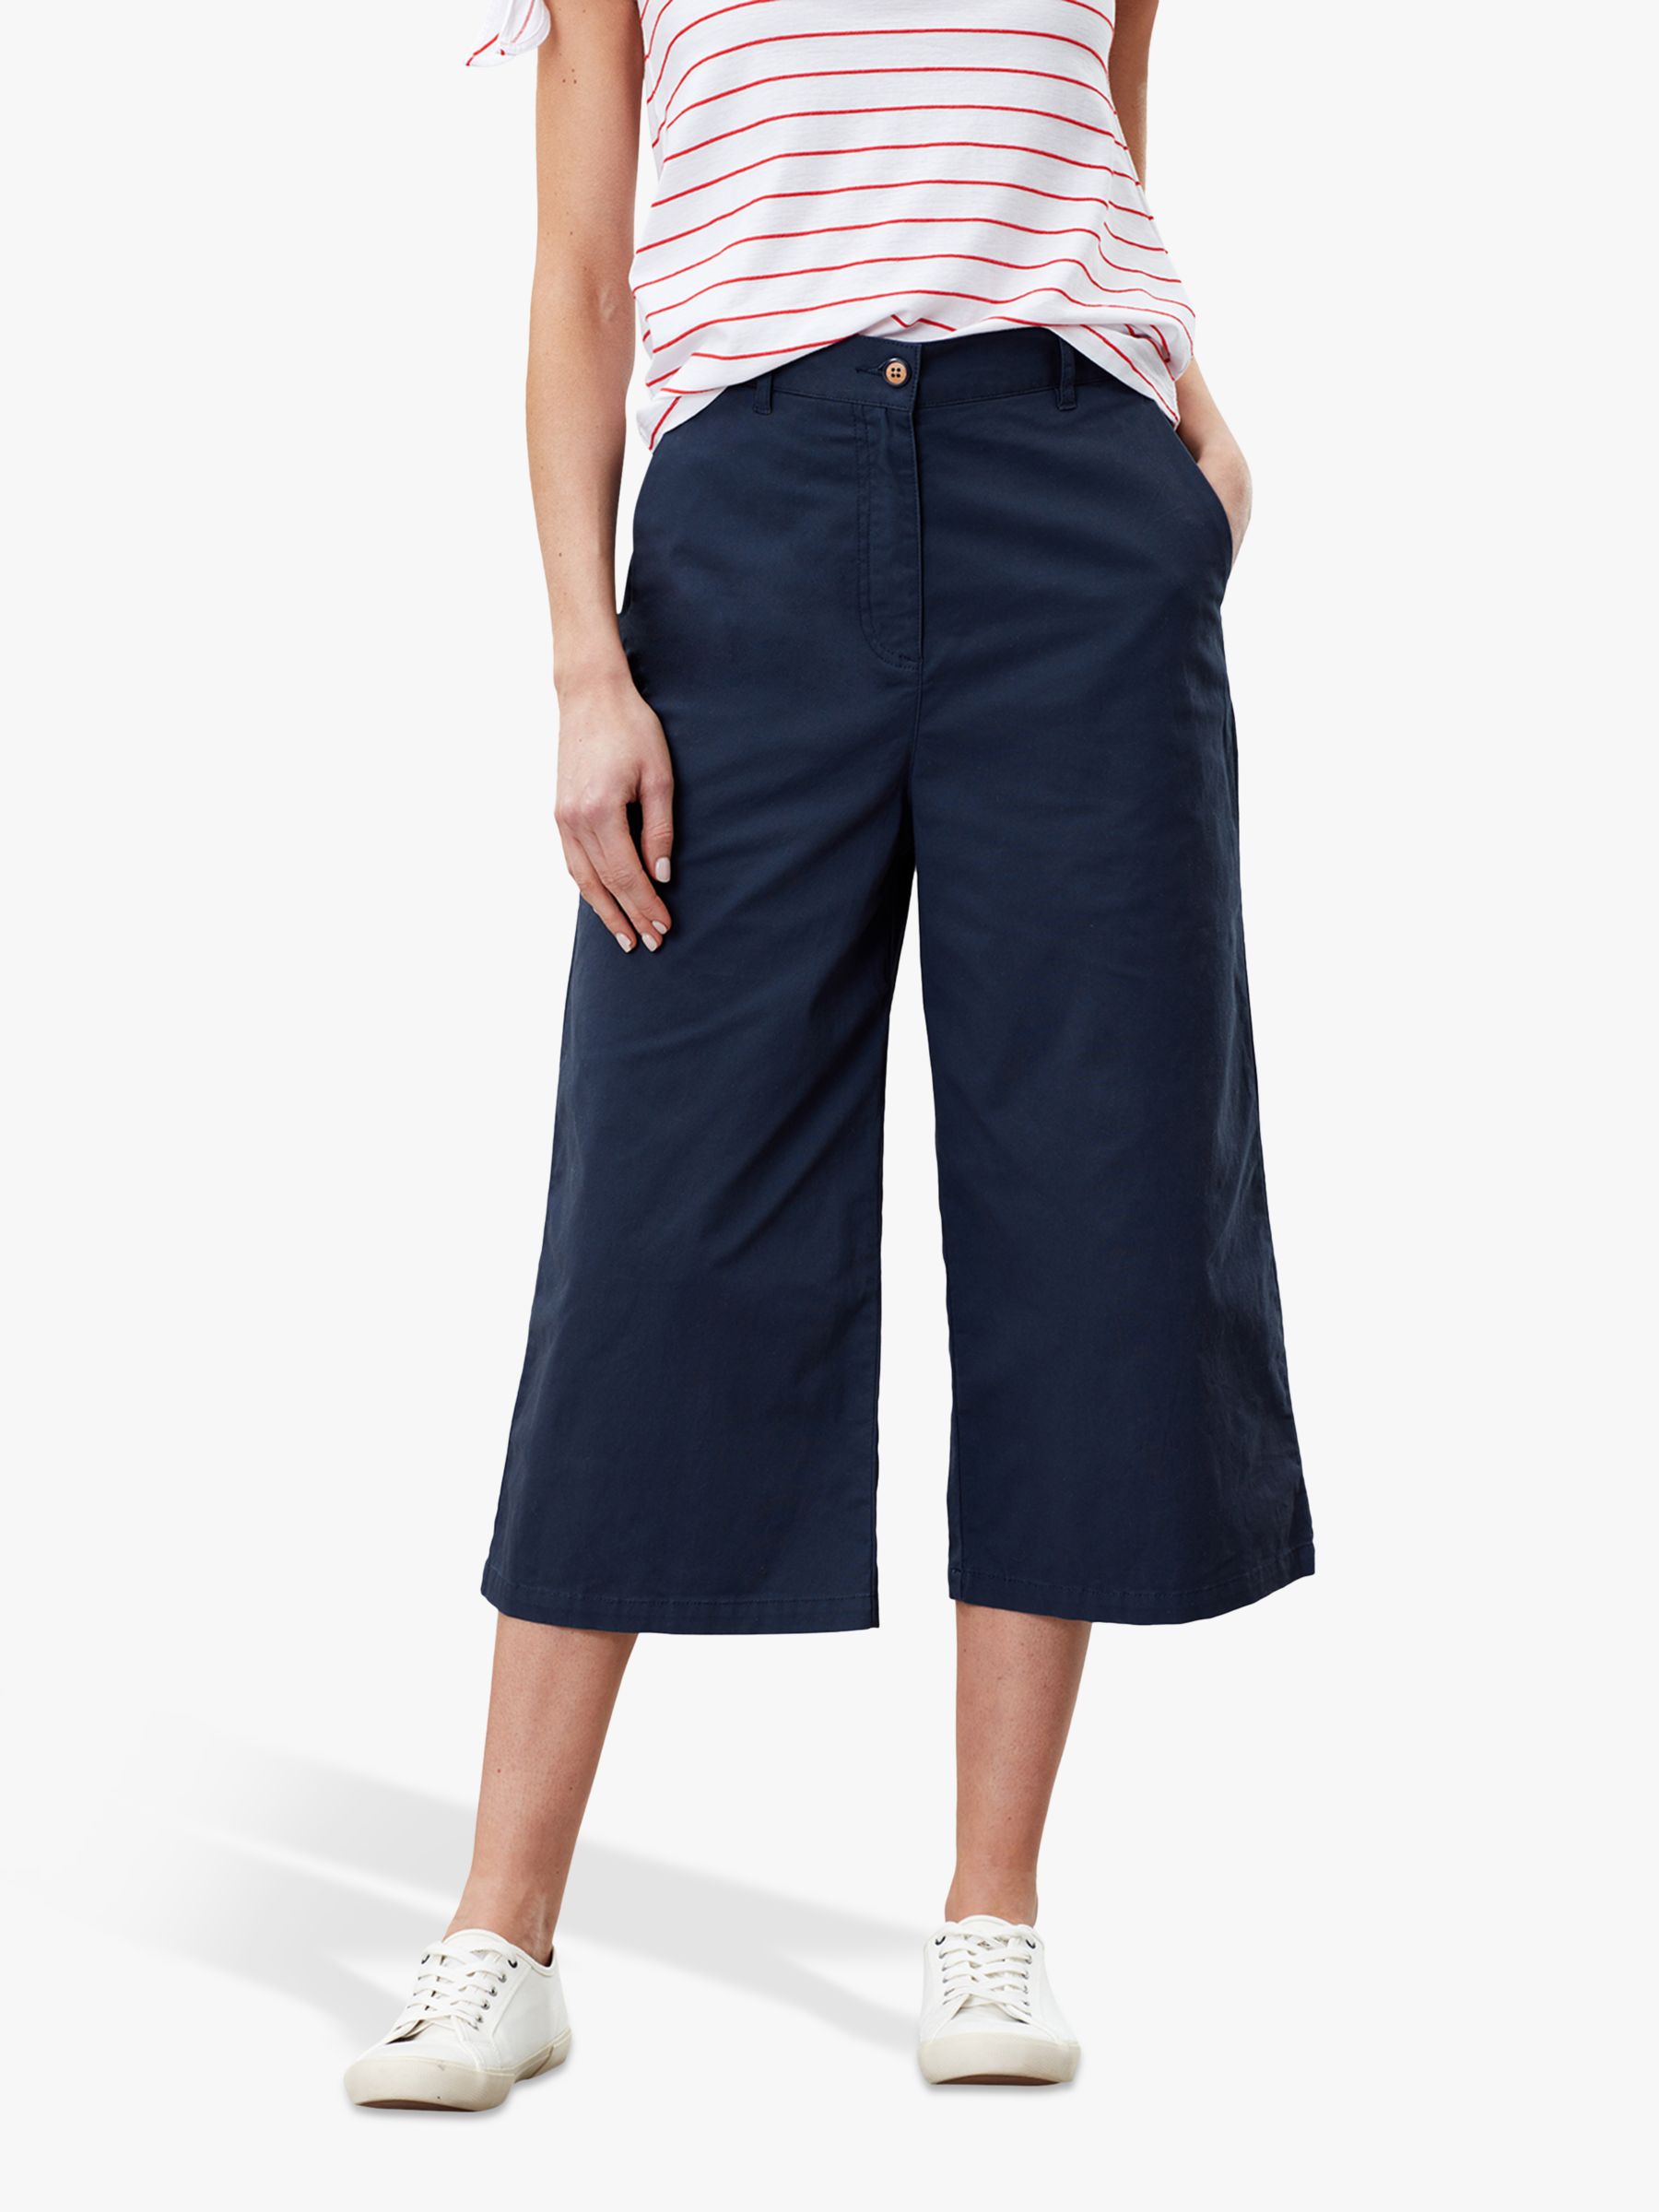 Joules Compton Wide Leg Cropped Chinos, French Navy Blue 16 female 98% cotton, 2% elastane